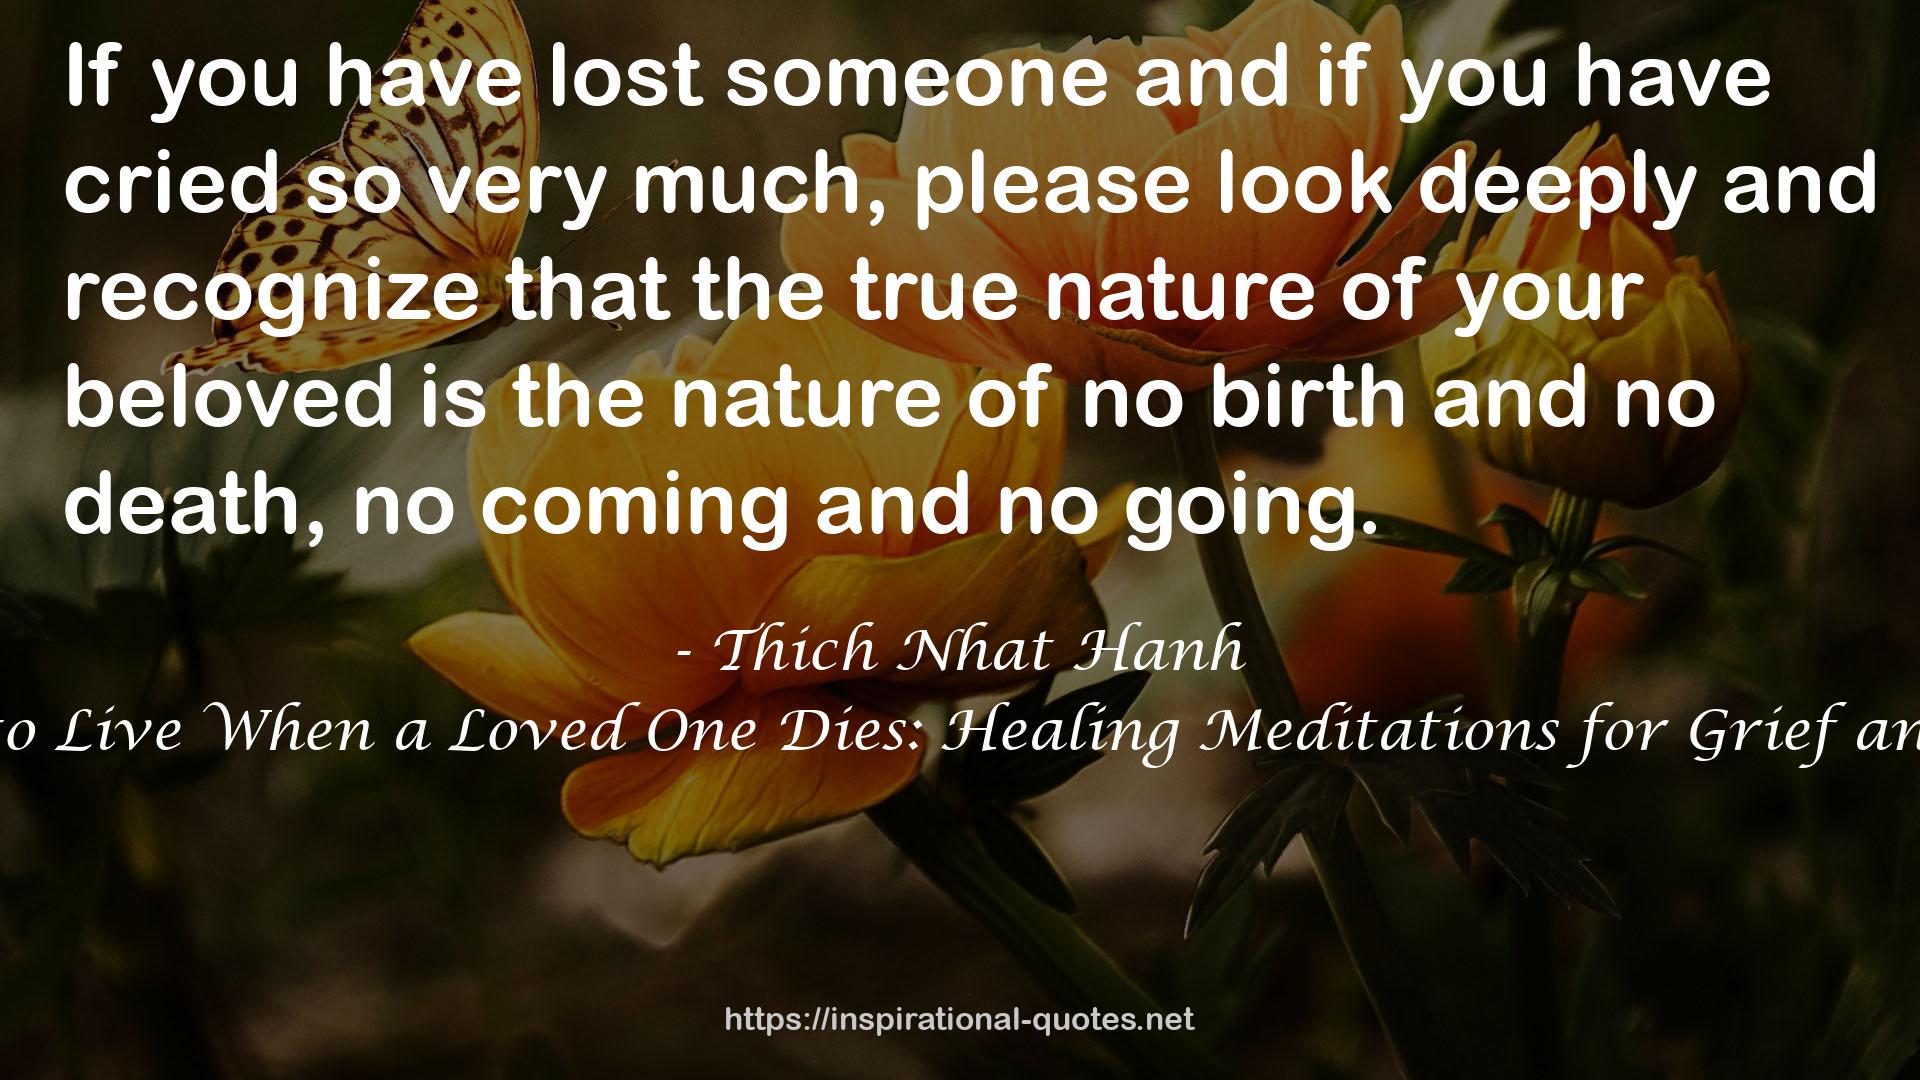 How to Live When a Loved One Dies: Healing Meditations for Grief and Loss QUOTES